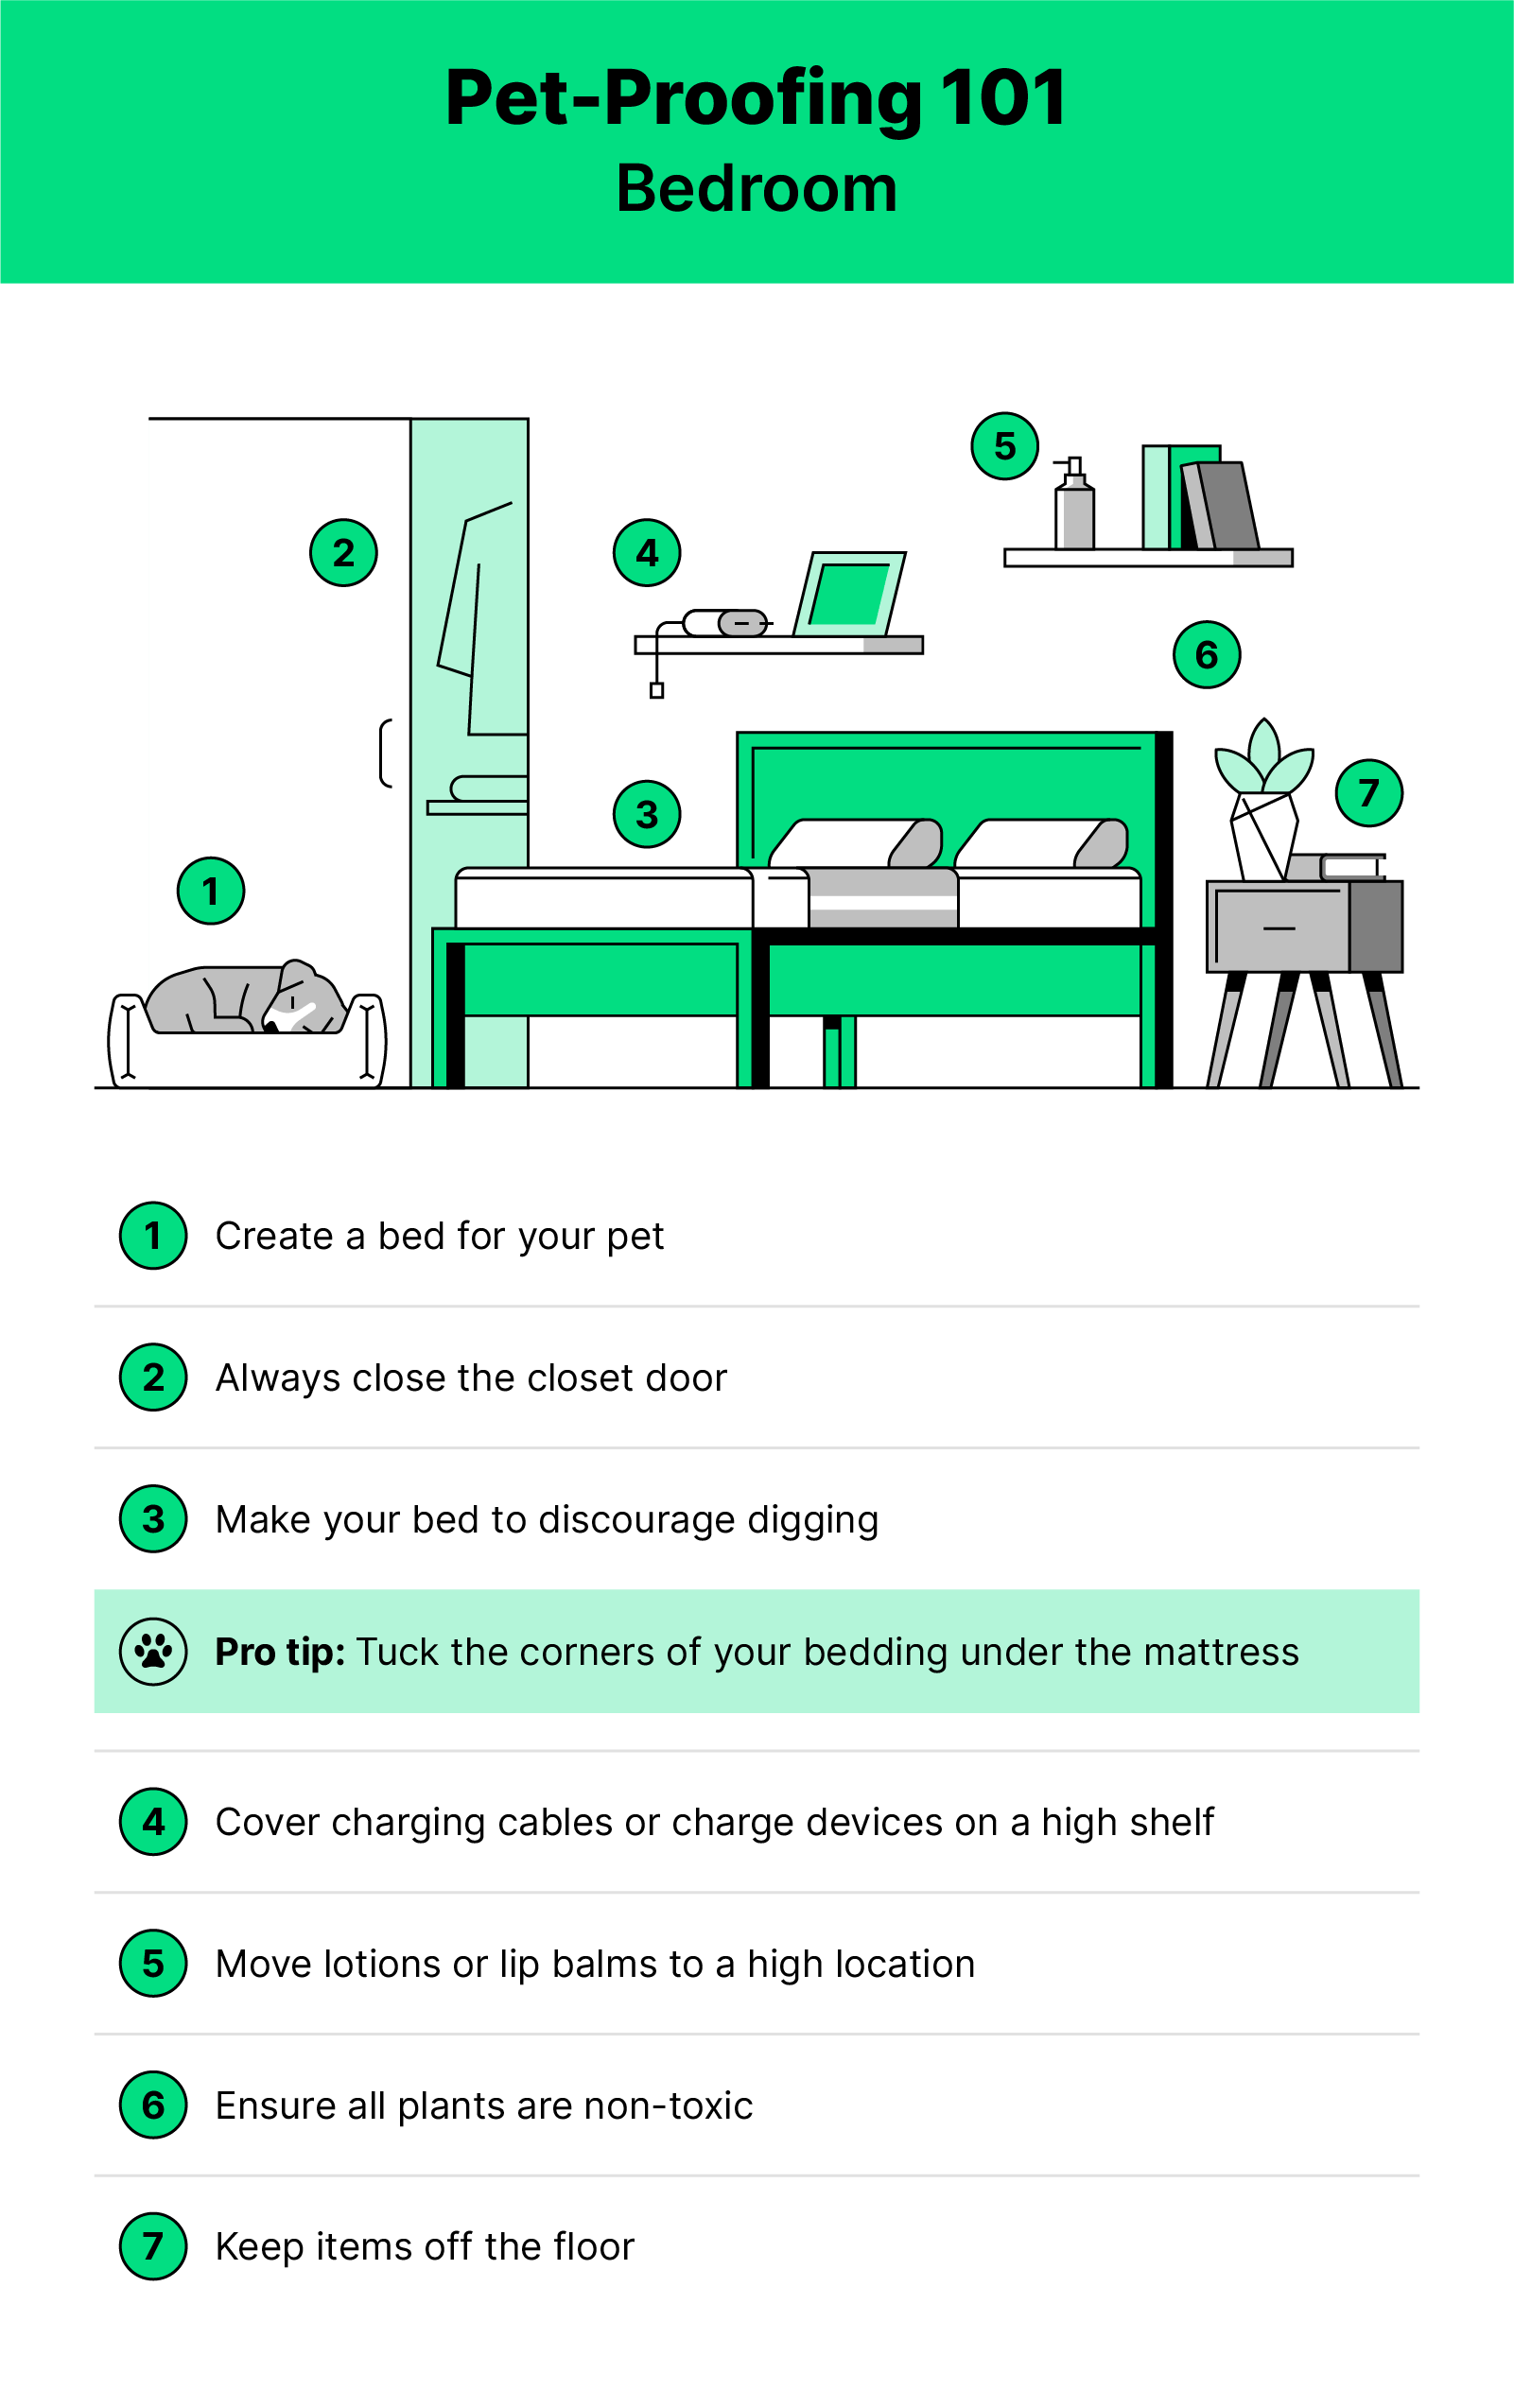 Green white and black illustration of a bedroom with a dog inside and pet proofing tips